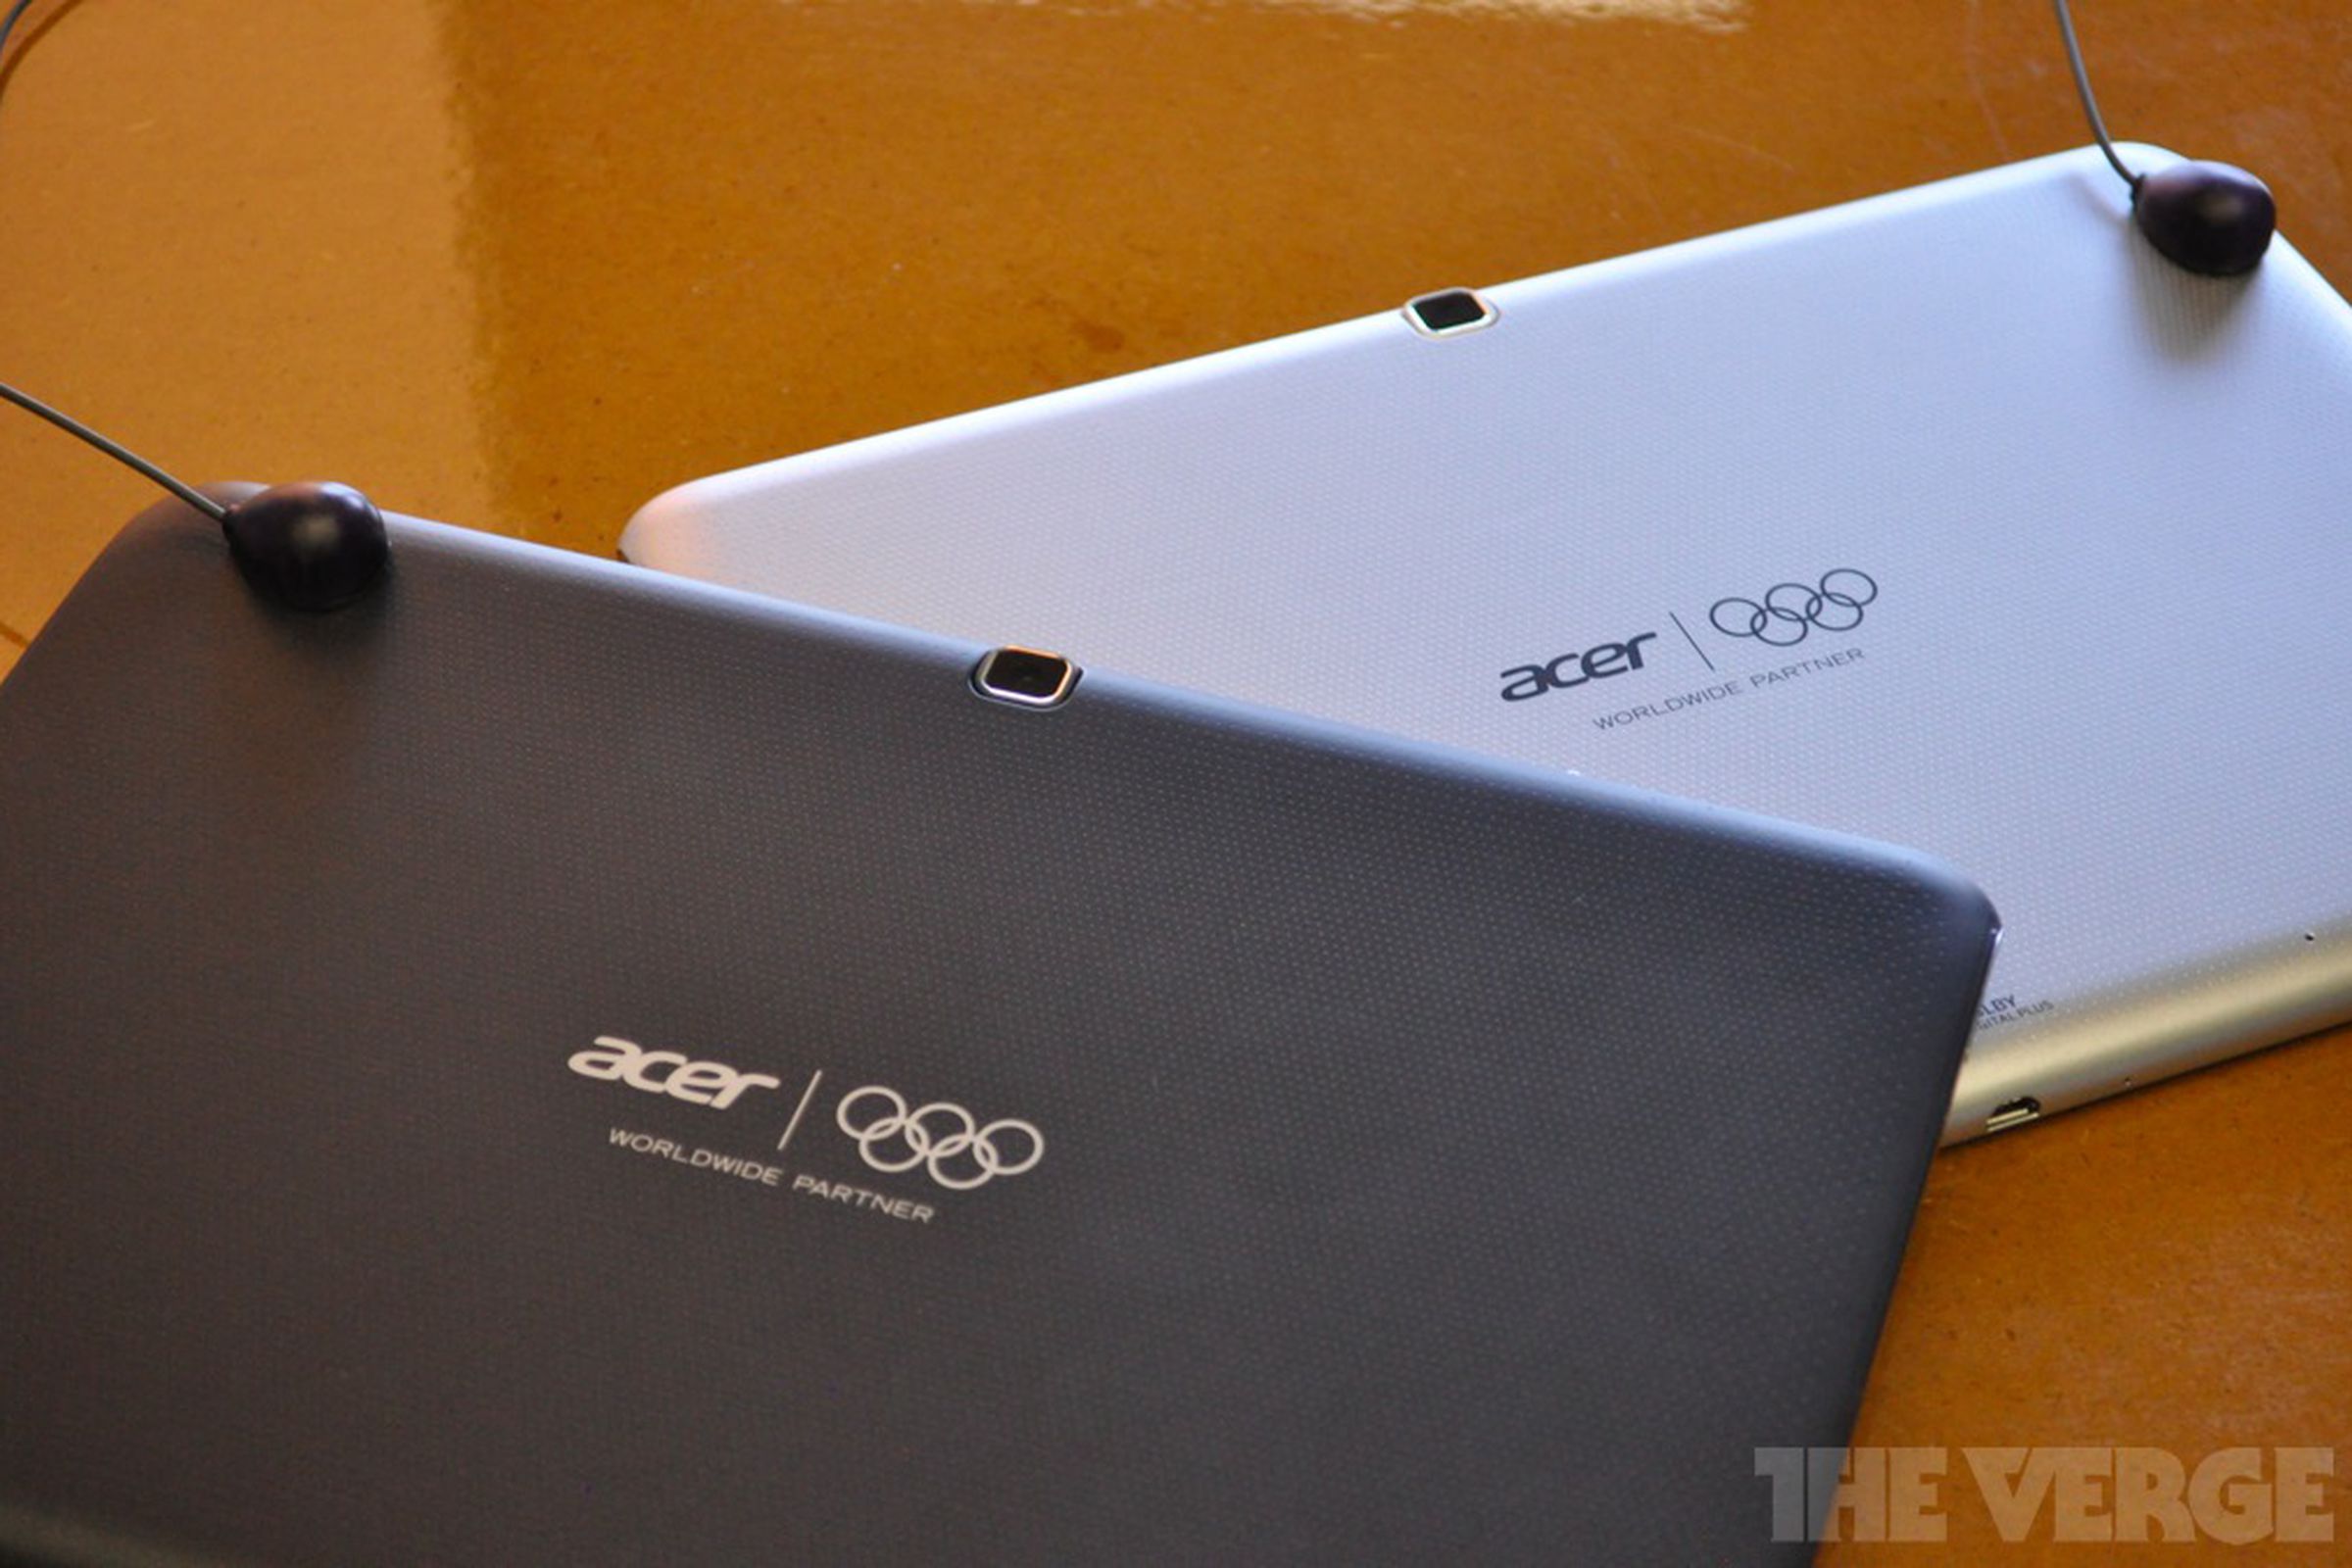 Gallery Photo: Acer Iconia Tab Olympic Games Edition hands-on photos